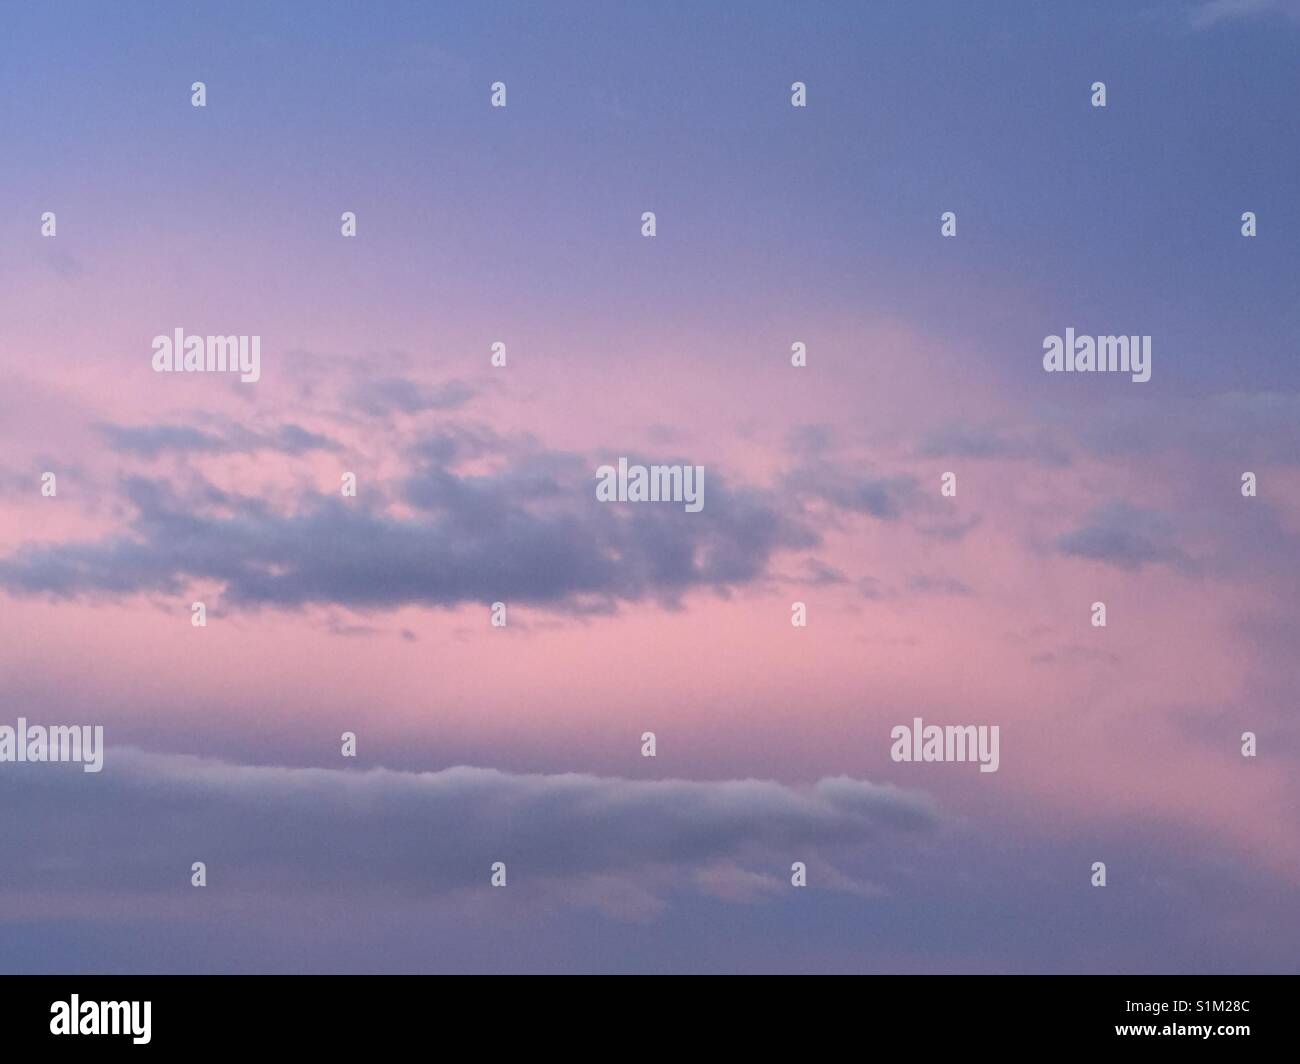 Pink sky at night with fluffy clouds Stock Photo